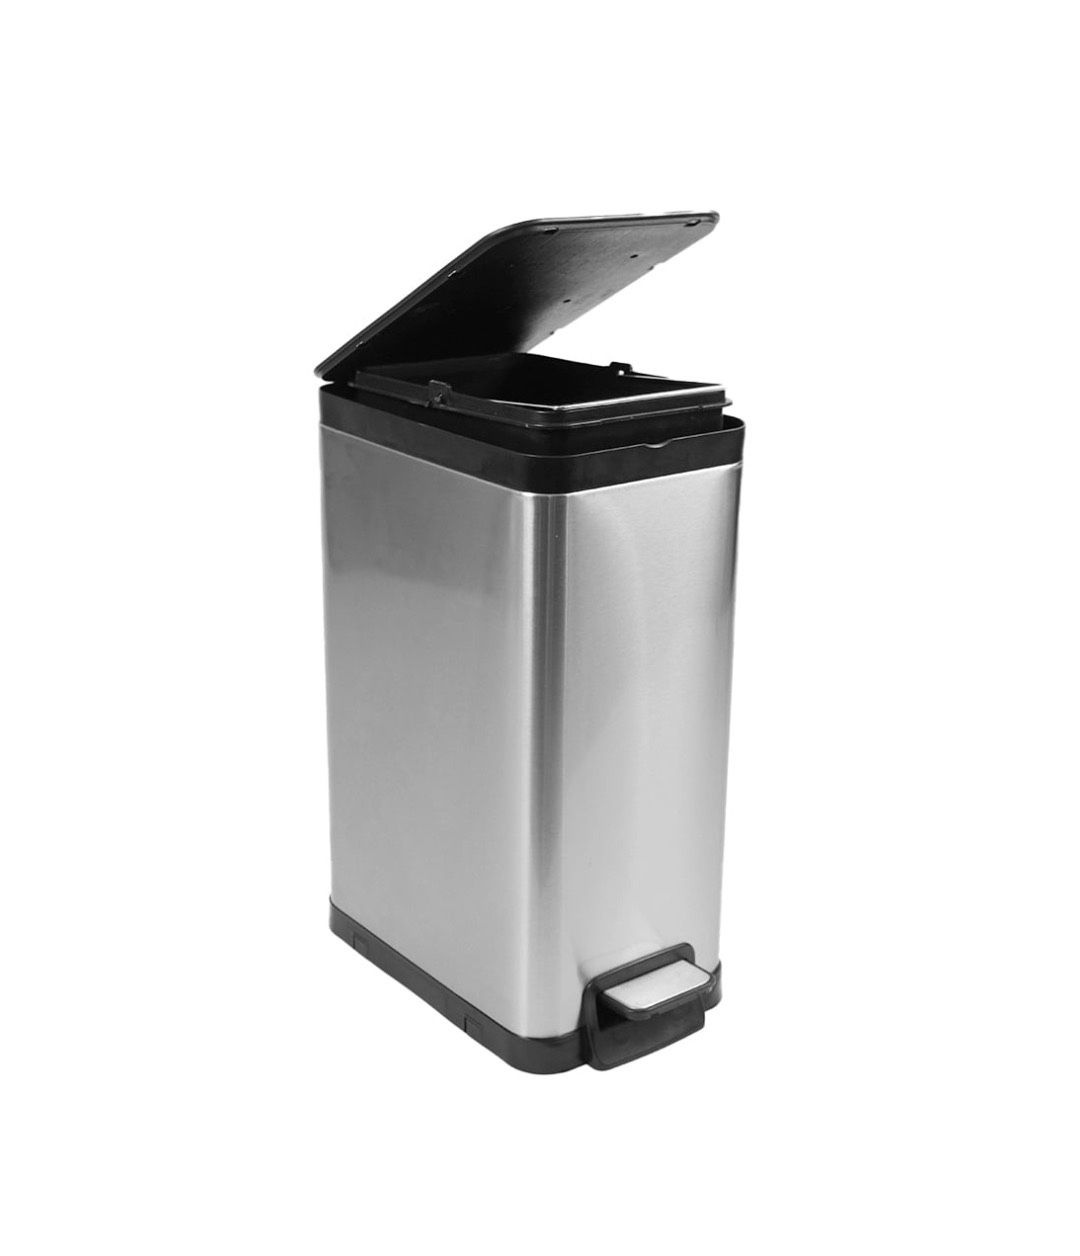 Stainless Steel Kitchen Trash Can (7.9 Gallon)